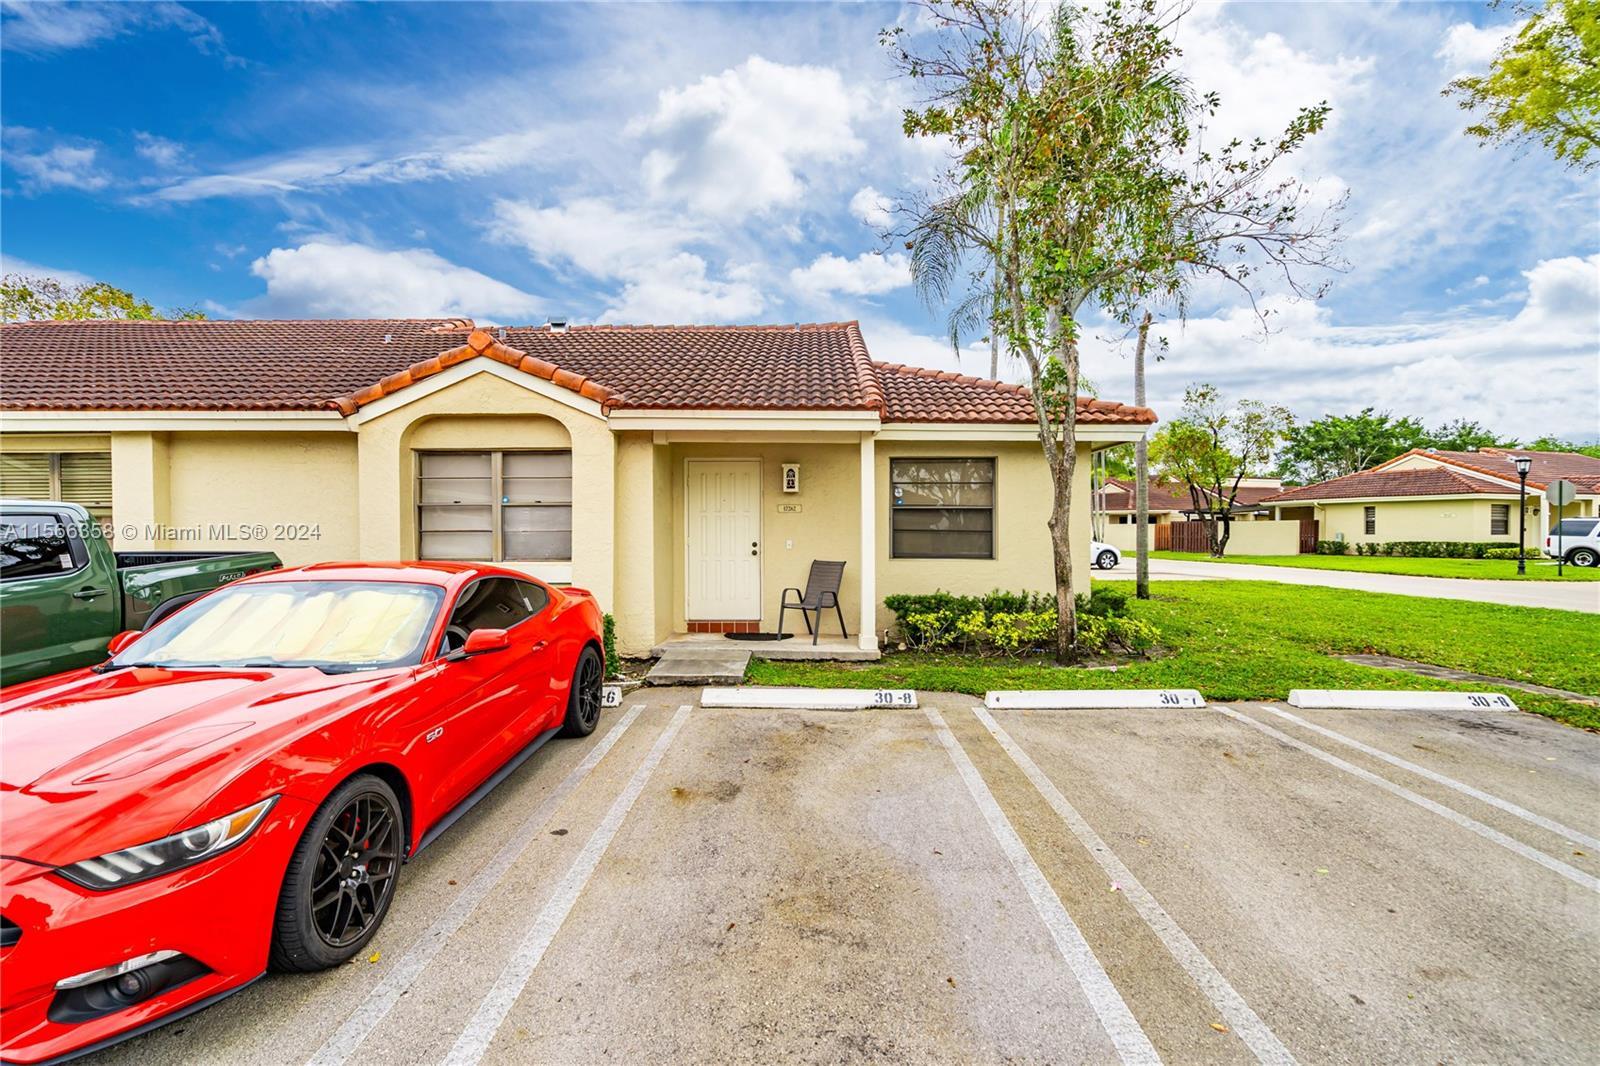 Welcome to Villas at the Moors! this beautiful 2/2 villa is in the heart of Miami lakes close to maj